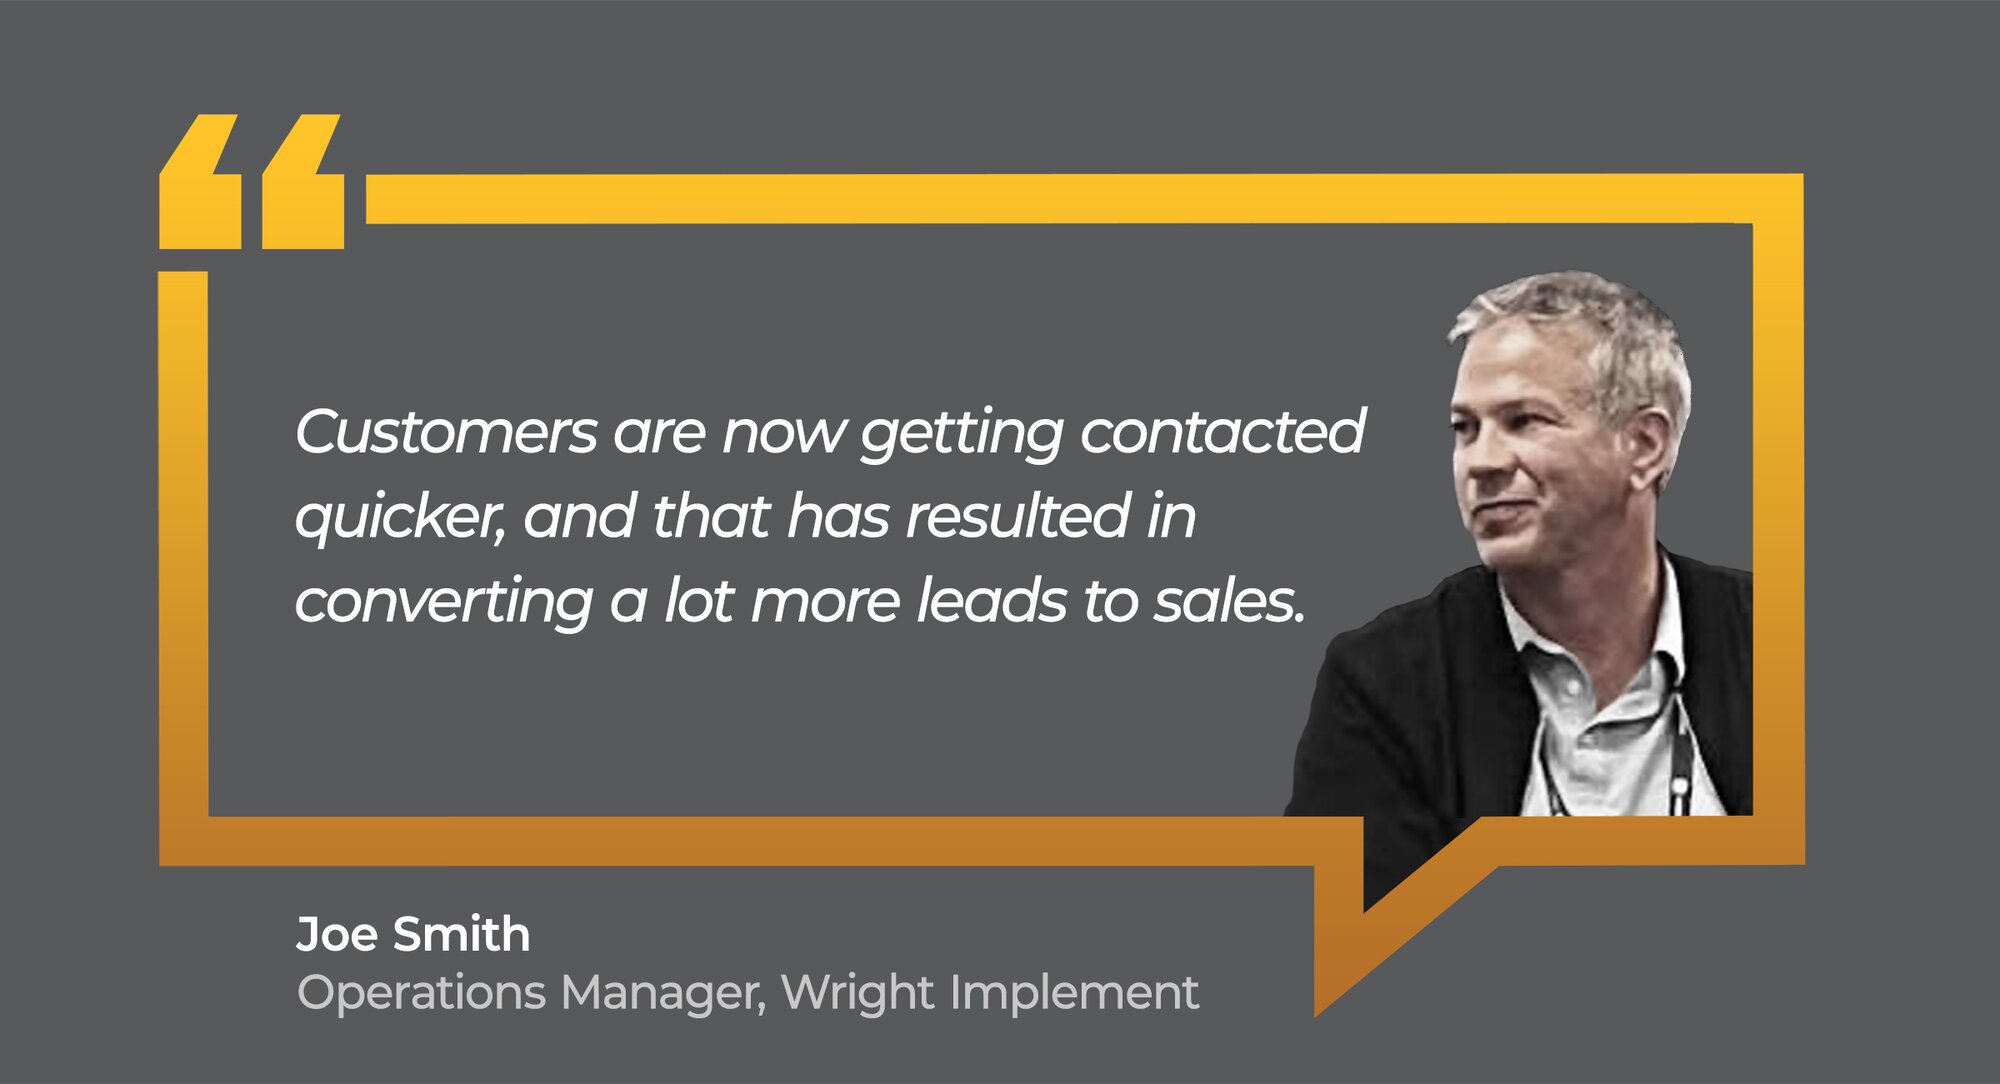 customer quote on converting more leads from Joe Smith at Wright Implement